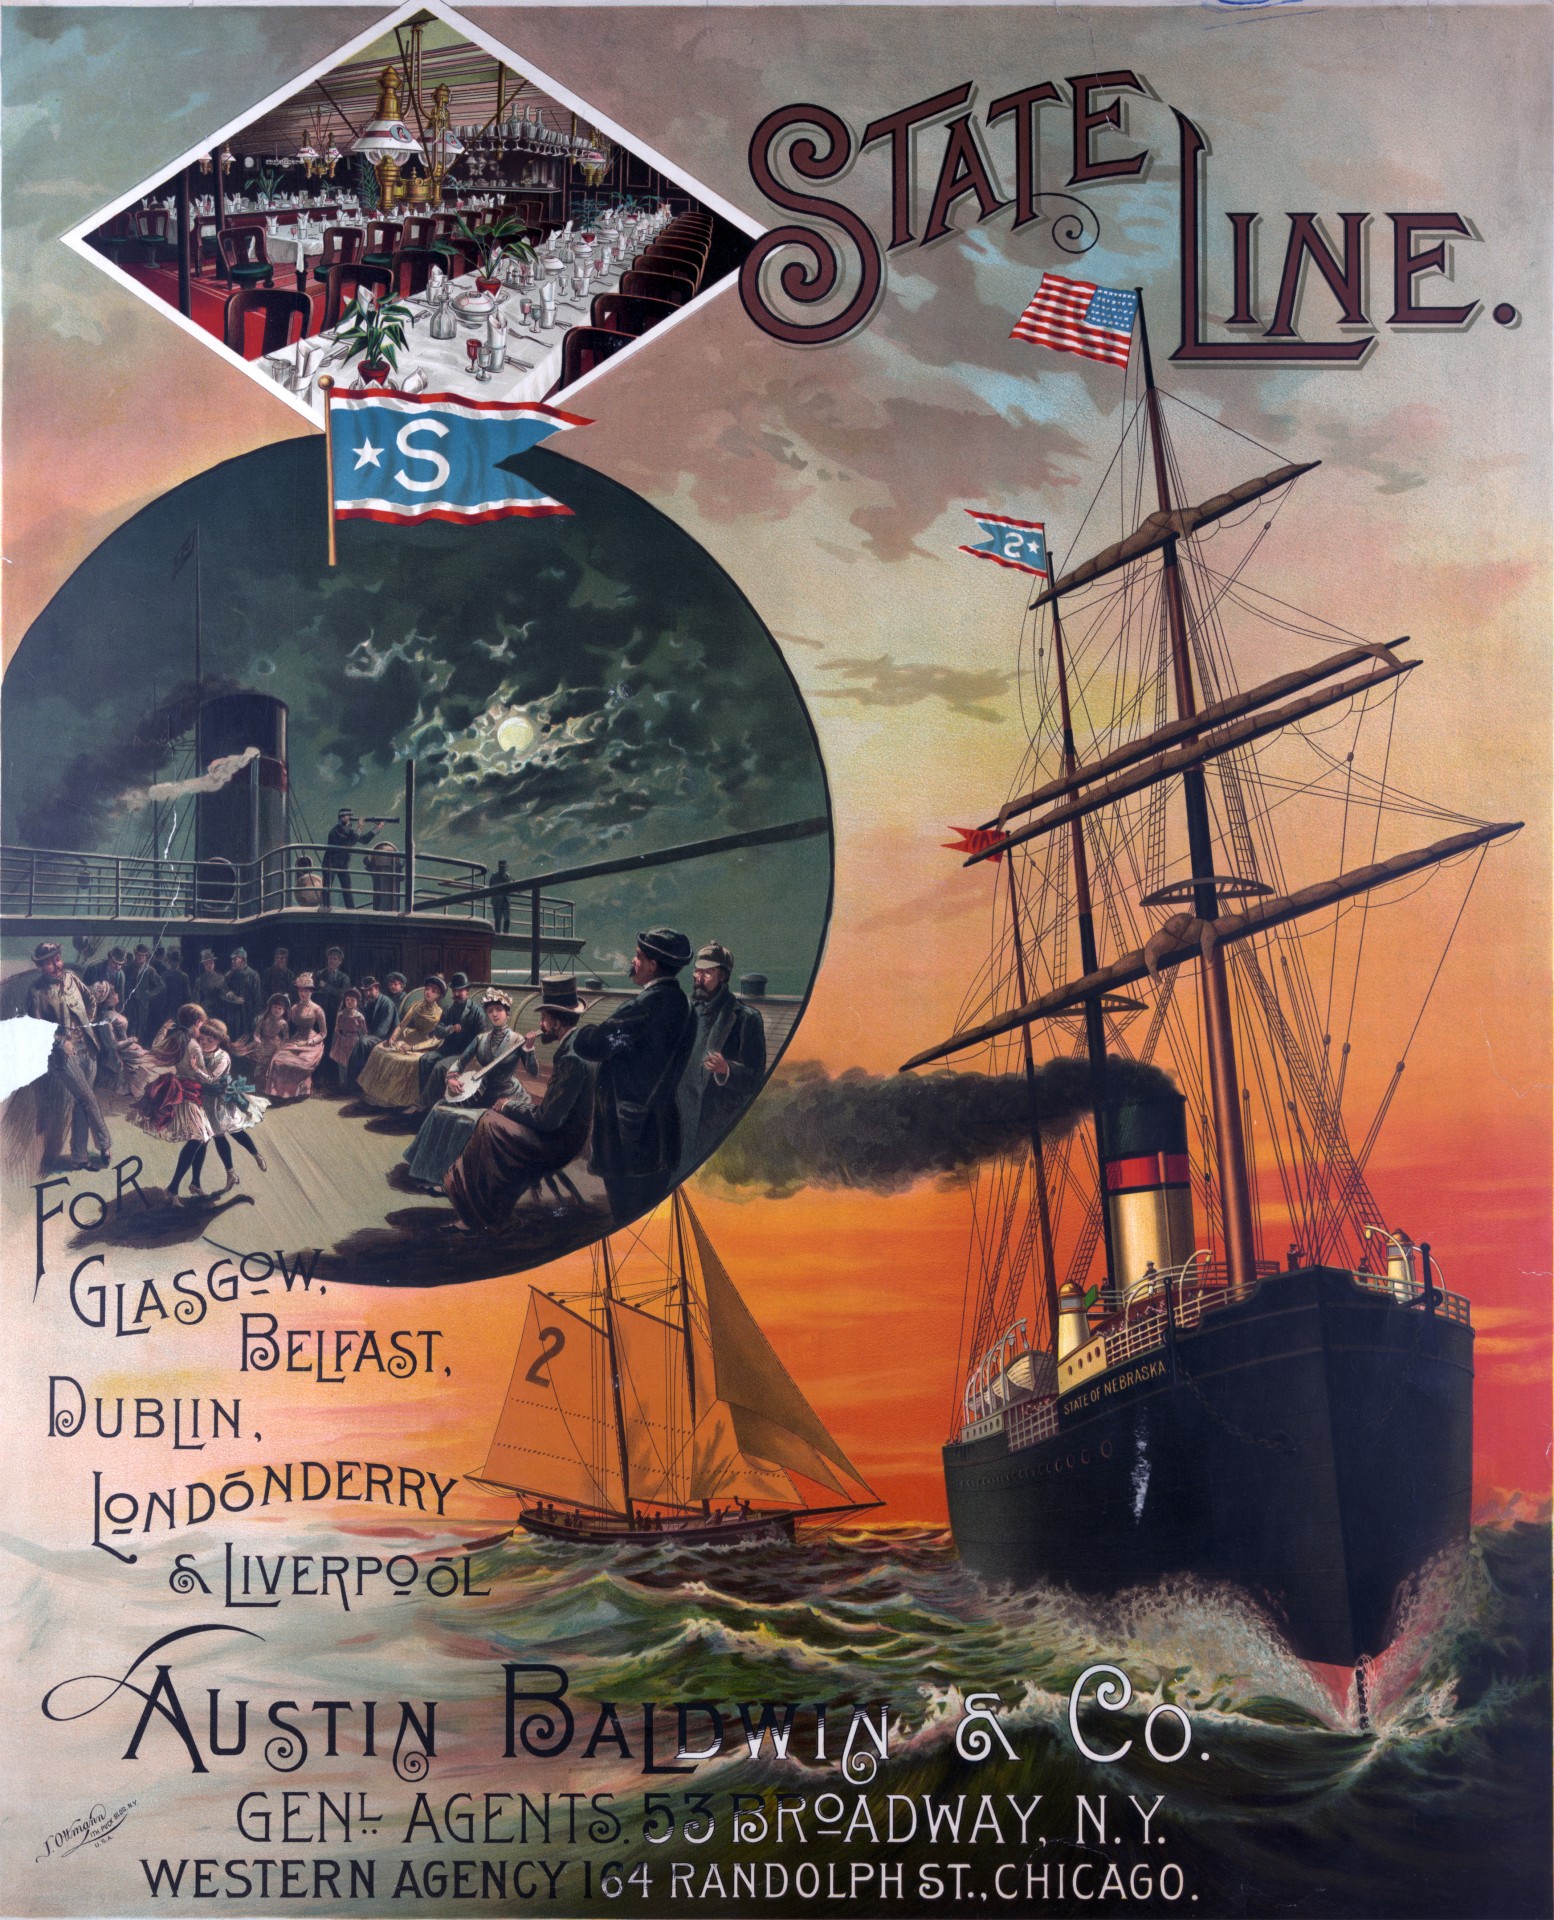 Public domain poster for State Line Ship